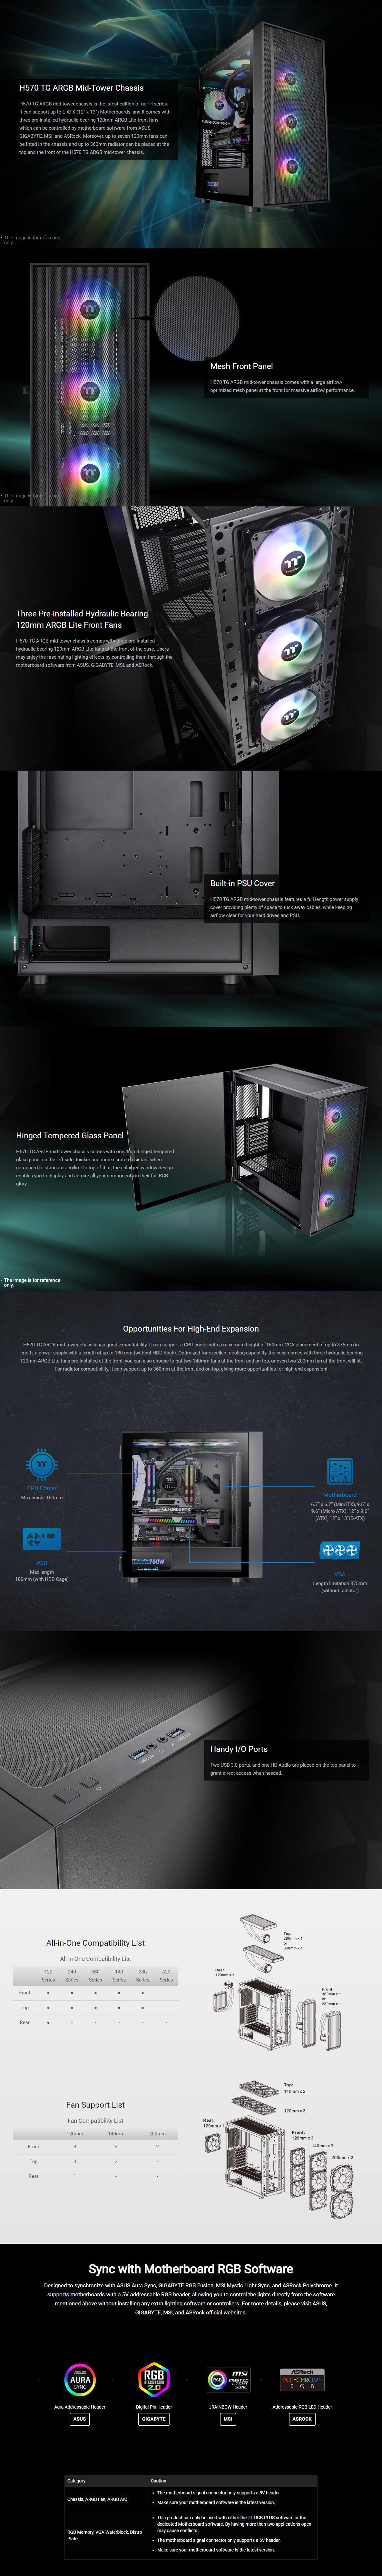 A large marketing image providing additional information about the product Thermaltake H570 Mesh - ARGB Mid Tower Case (Black) - Additional alt info not provided